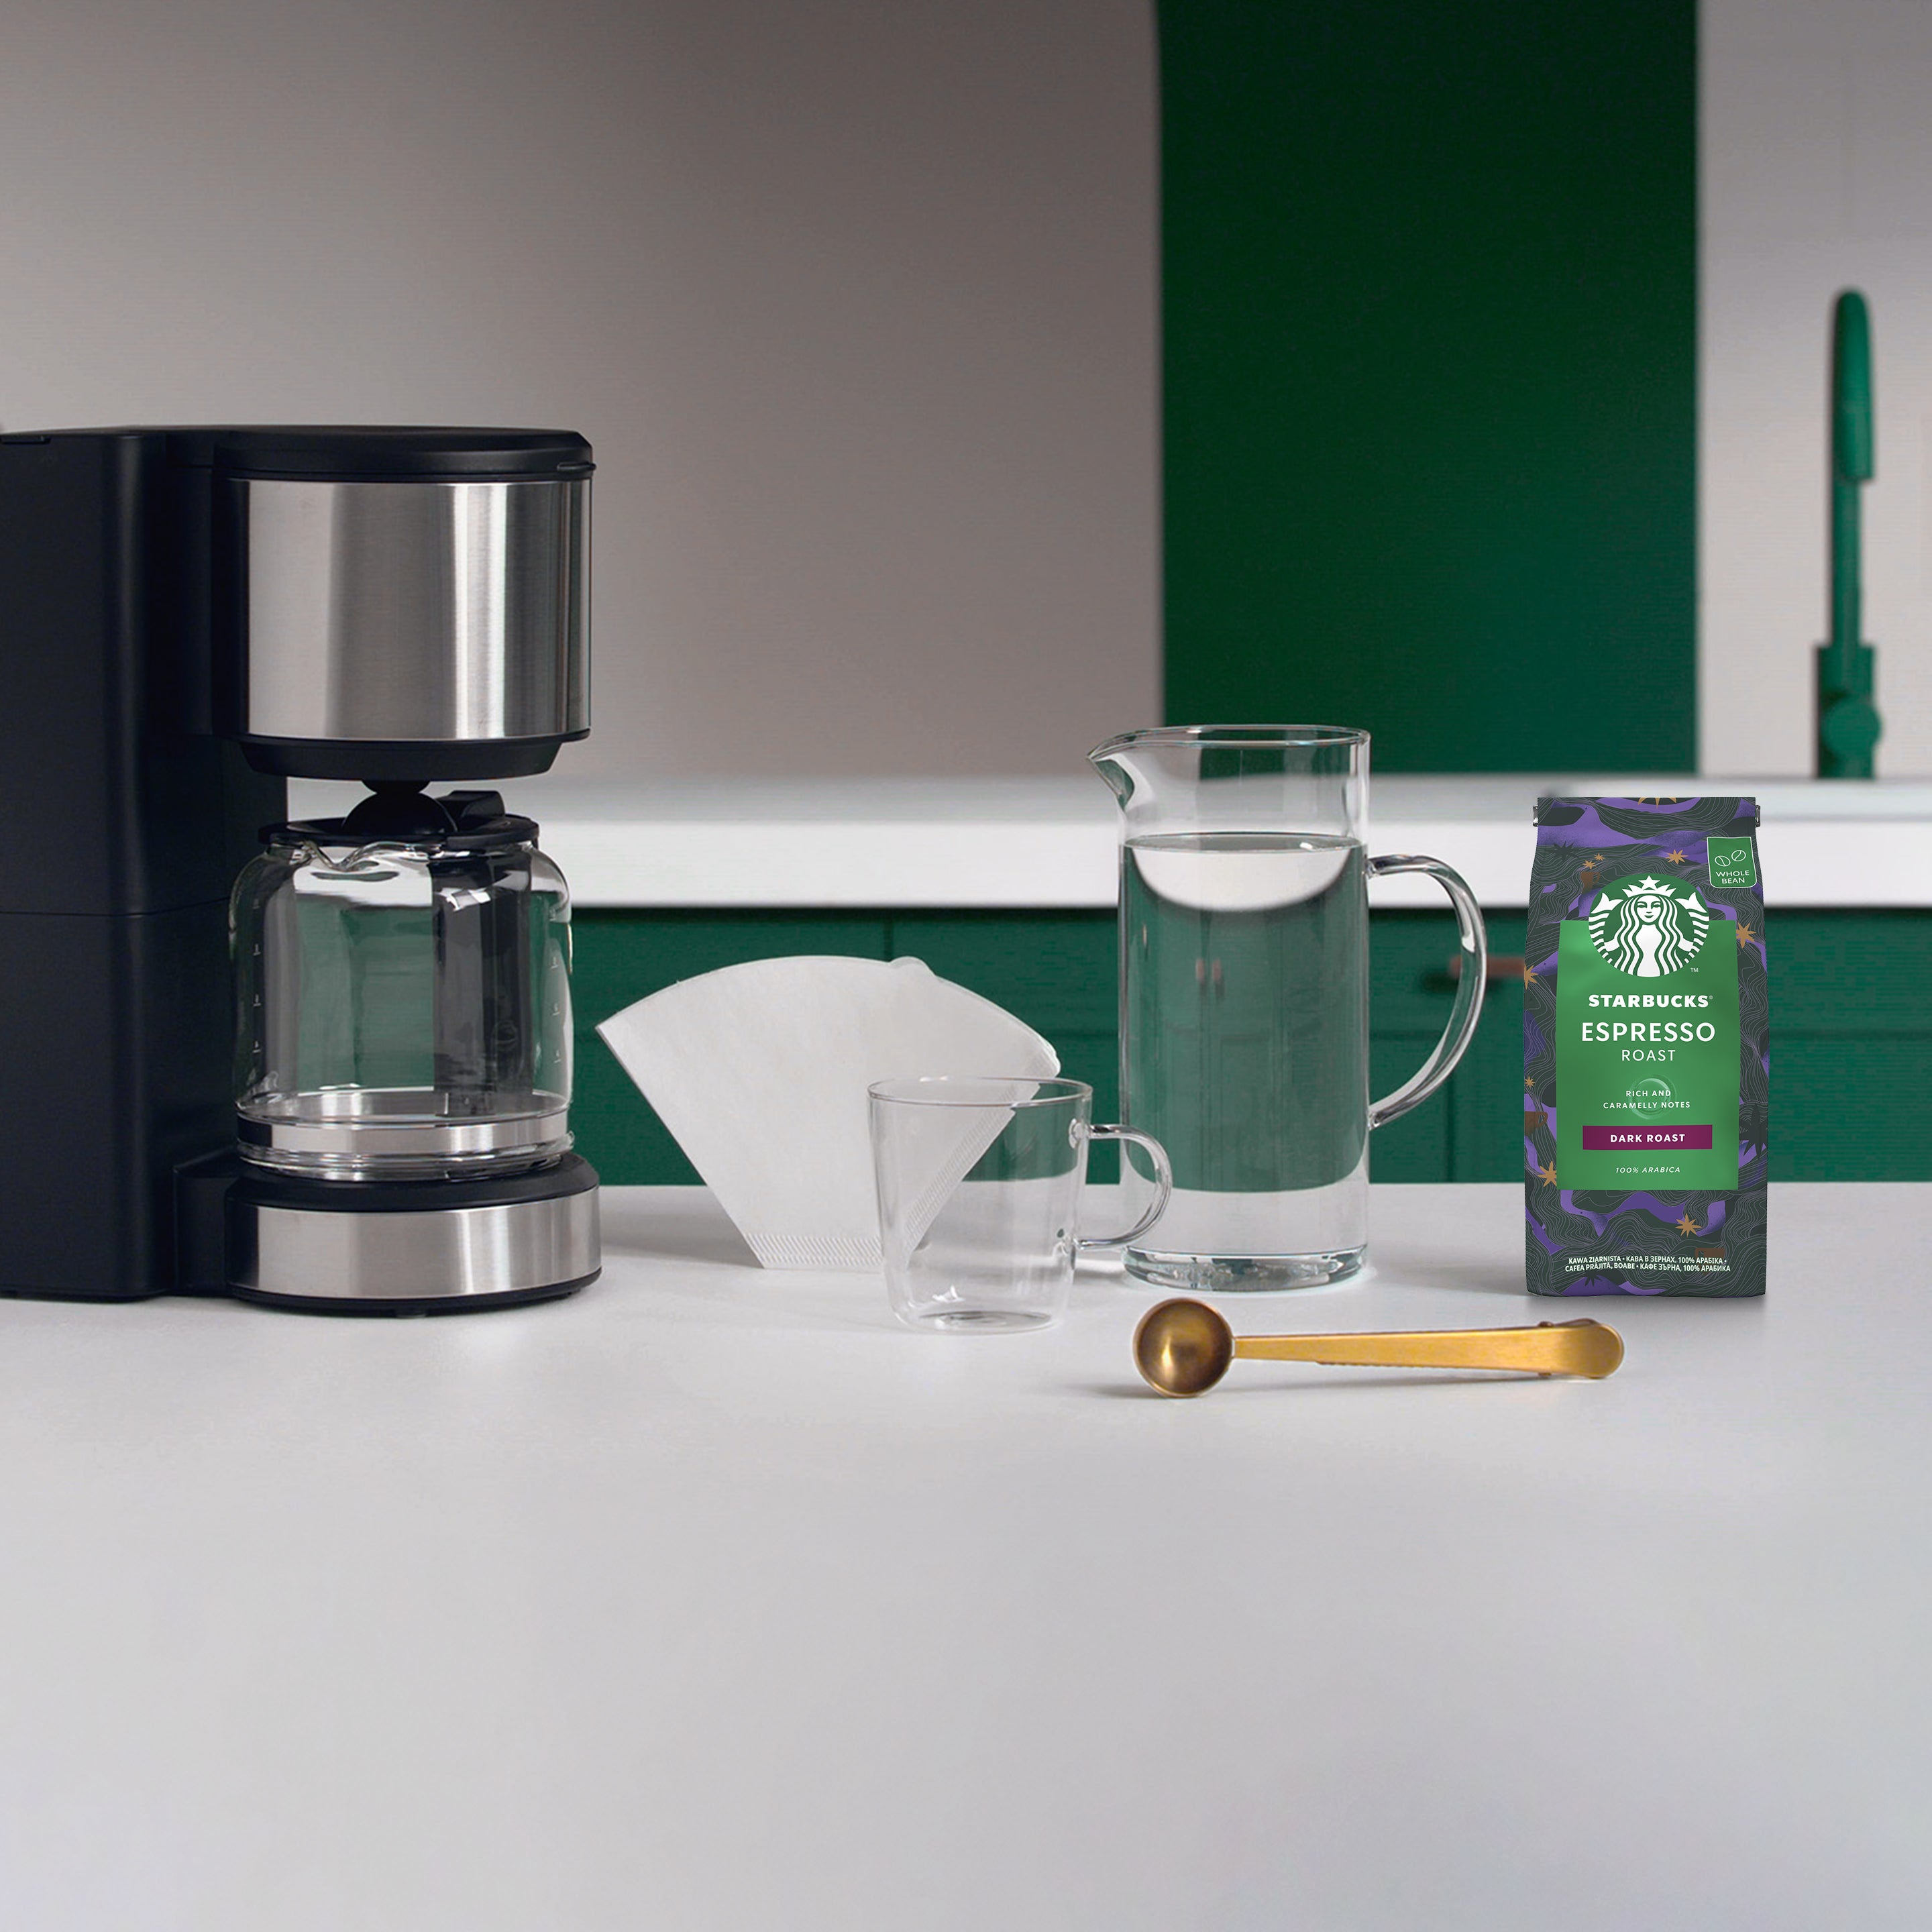 Making STARBUCKS at home - Dolce Gusto Coffee Machine from Delonghi. 